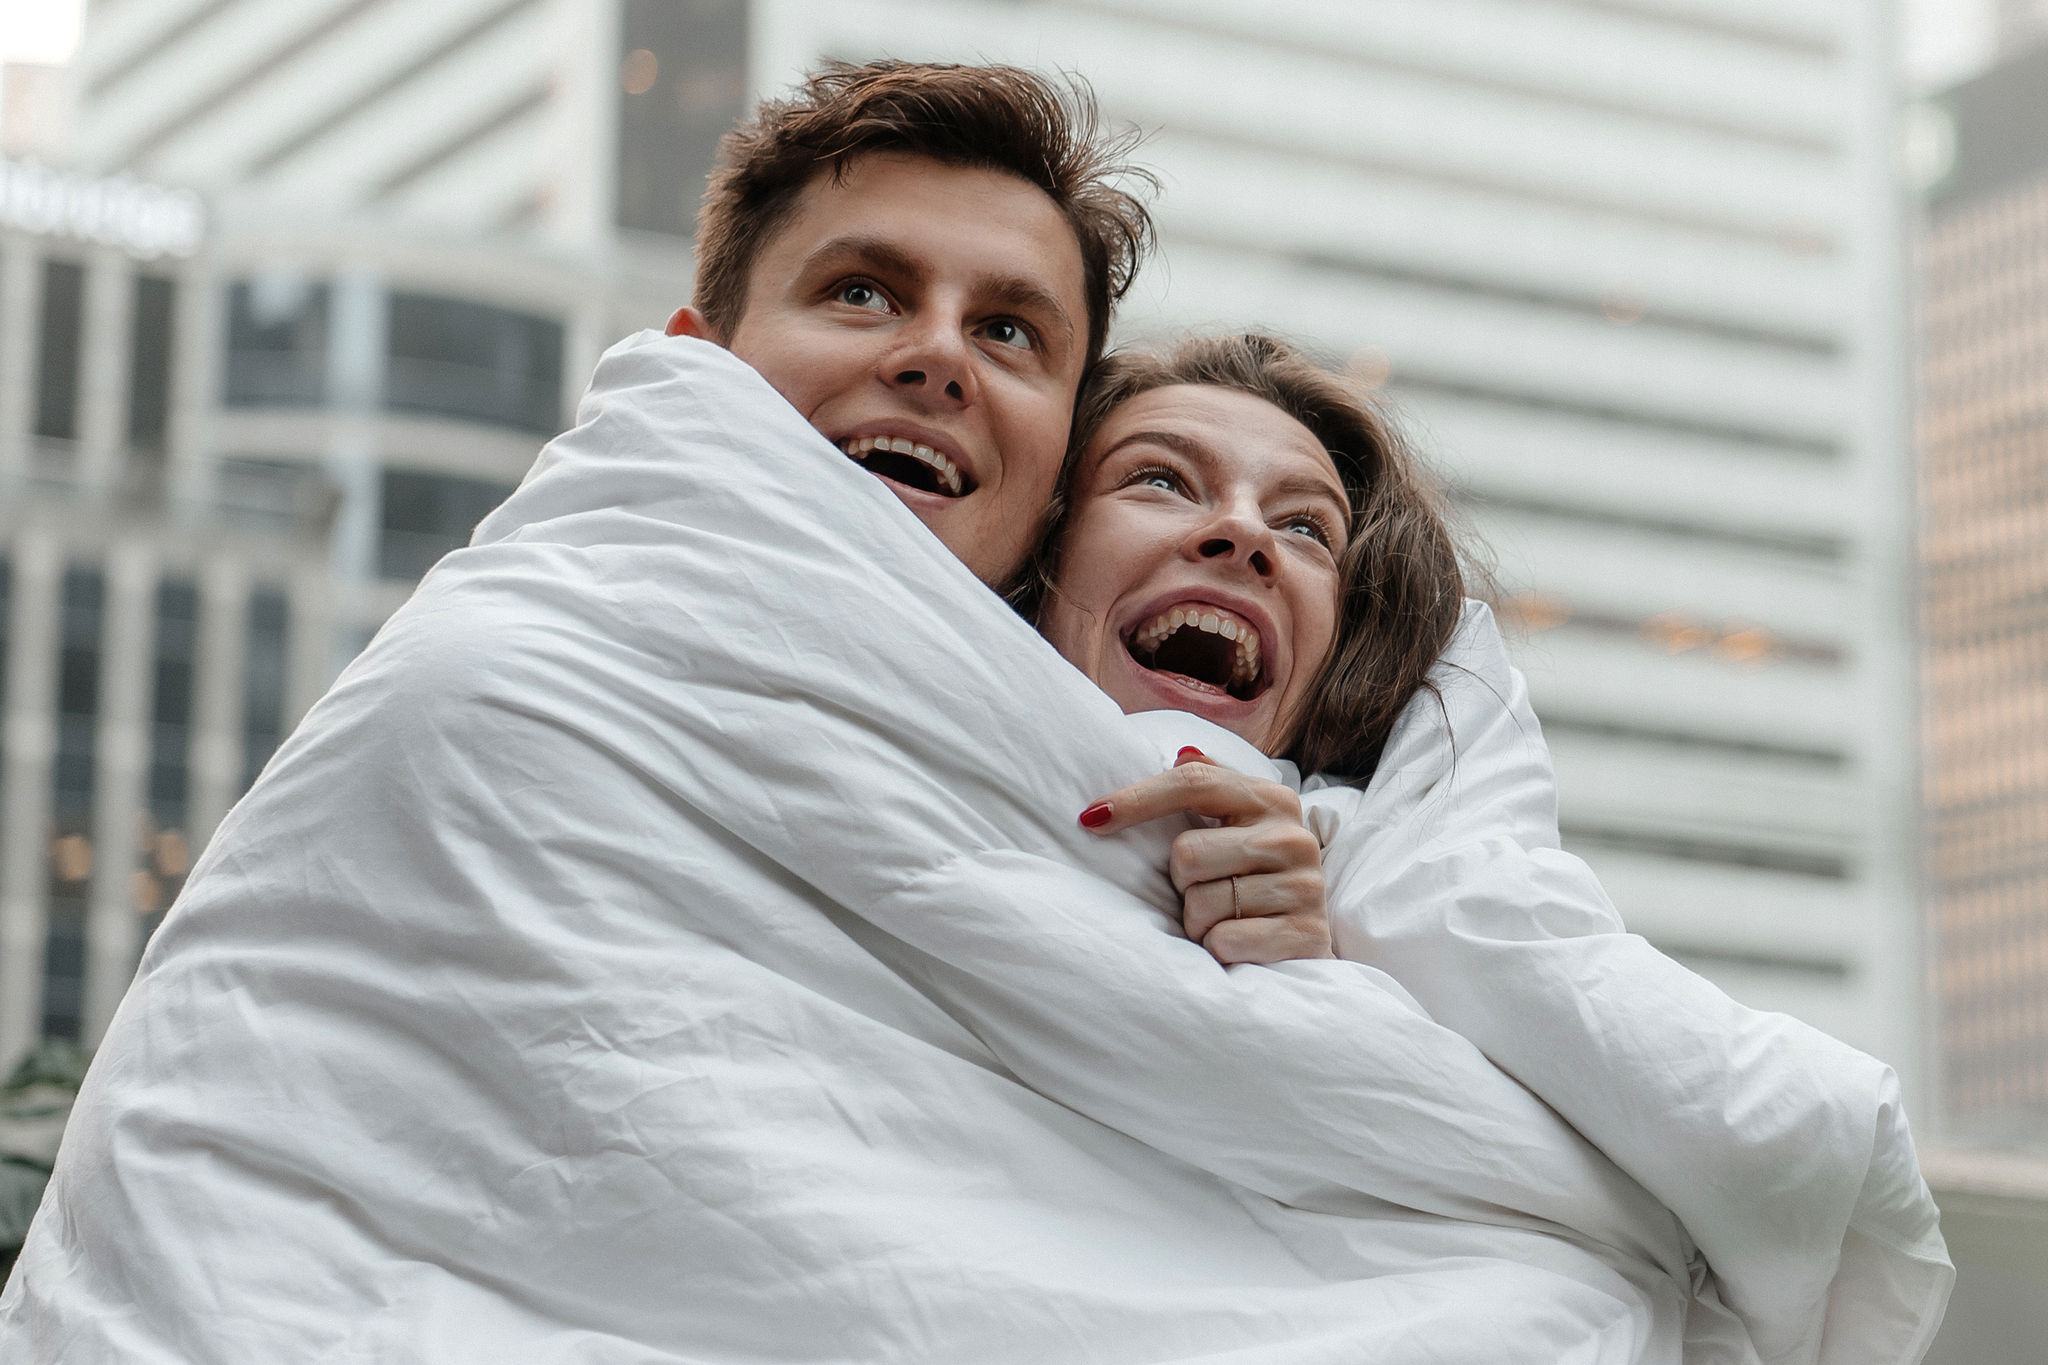 Wrapped In Blankets: Engagement Photoshoot | Popped Blog